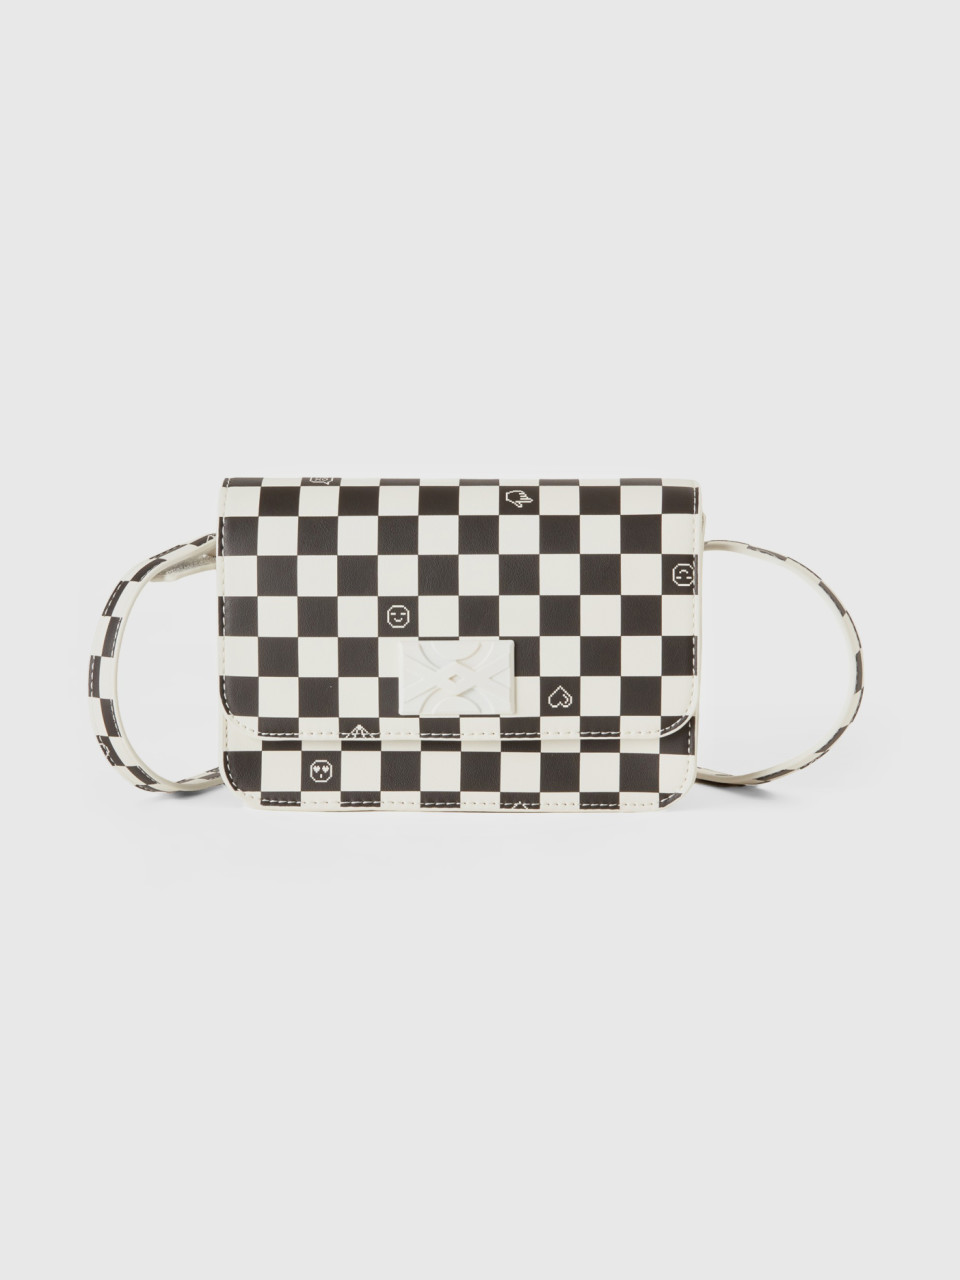 Benetton, Black And White Check Be Bag, Multi-color, Kids